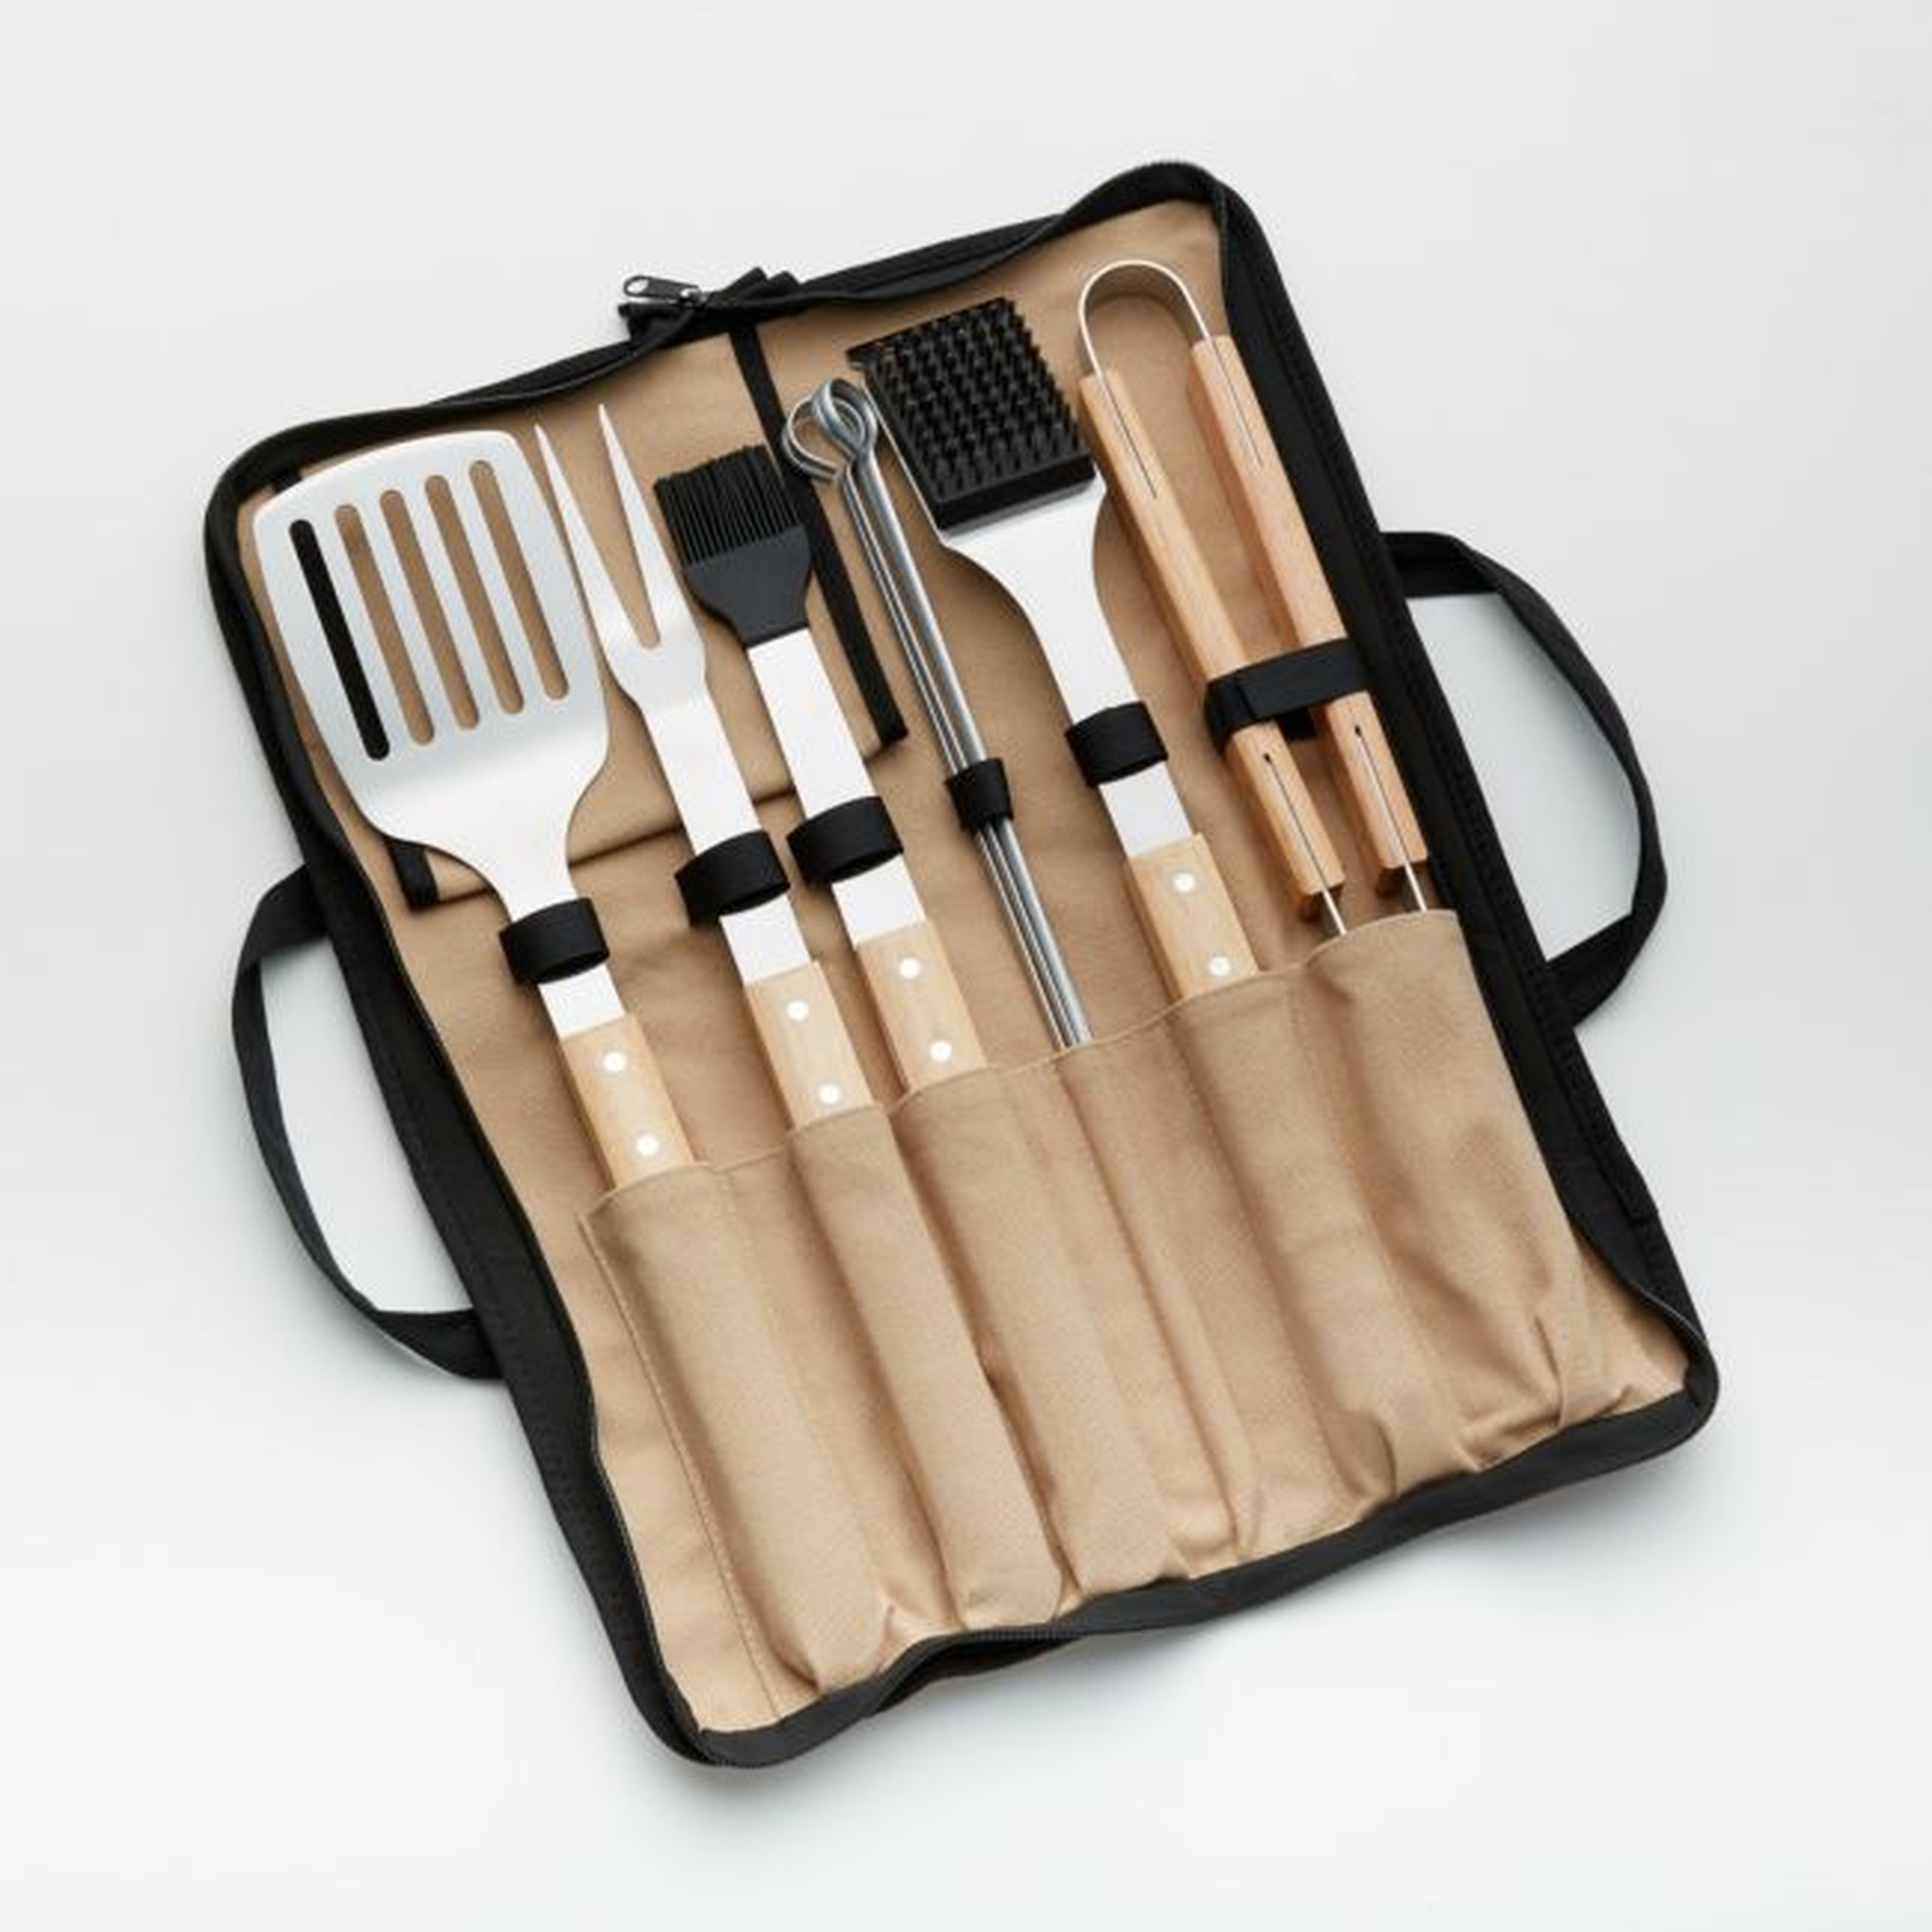 Wood-Handled 9-Piece Barbecue Tool Set - Crate and Barrel